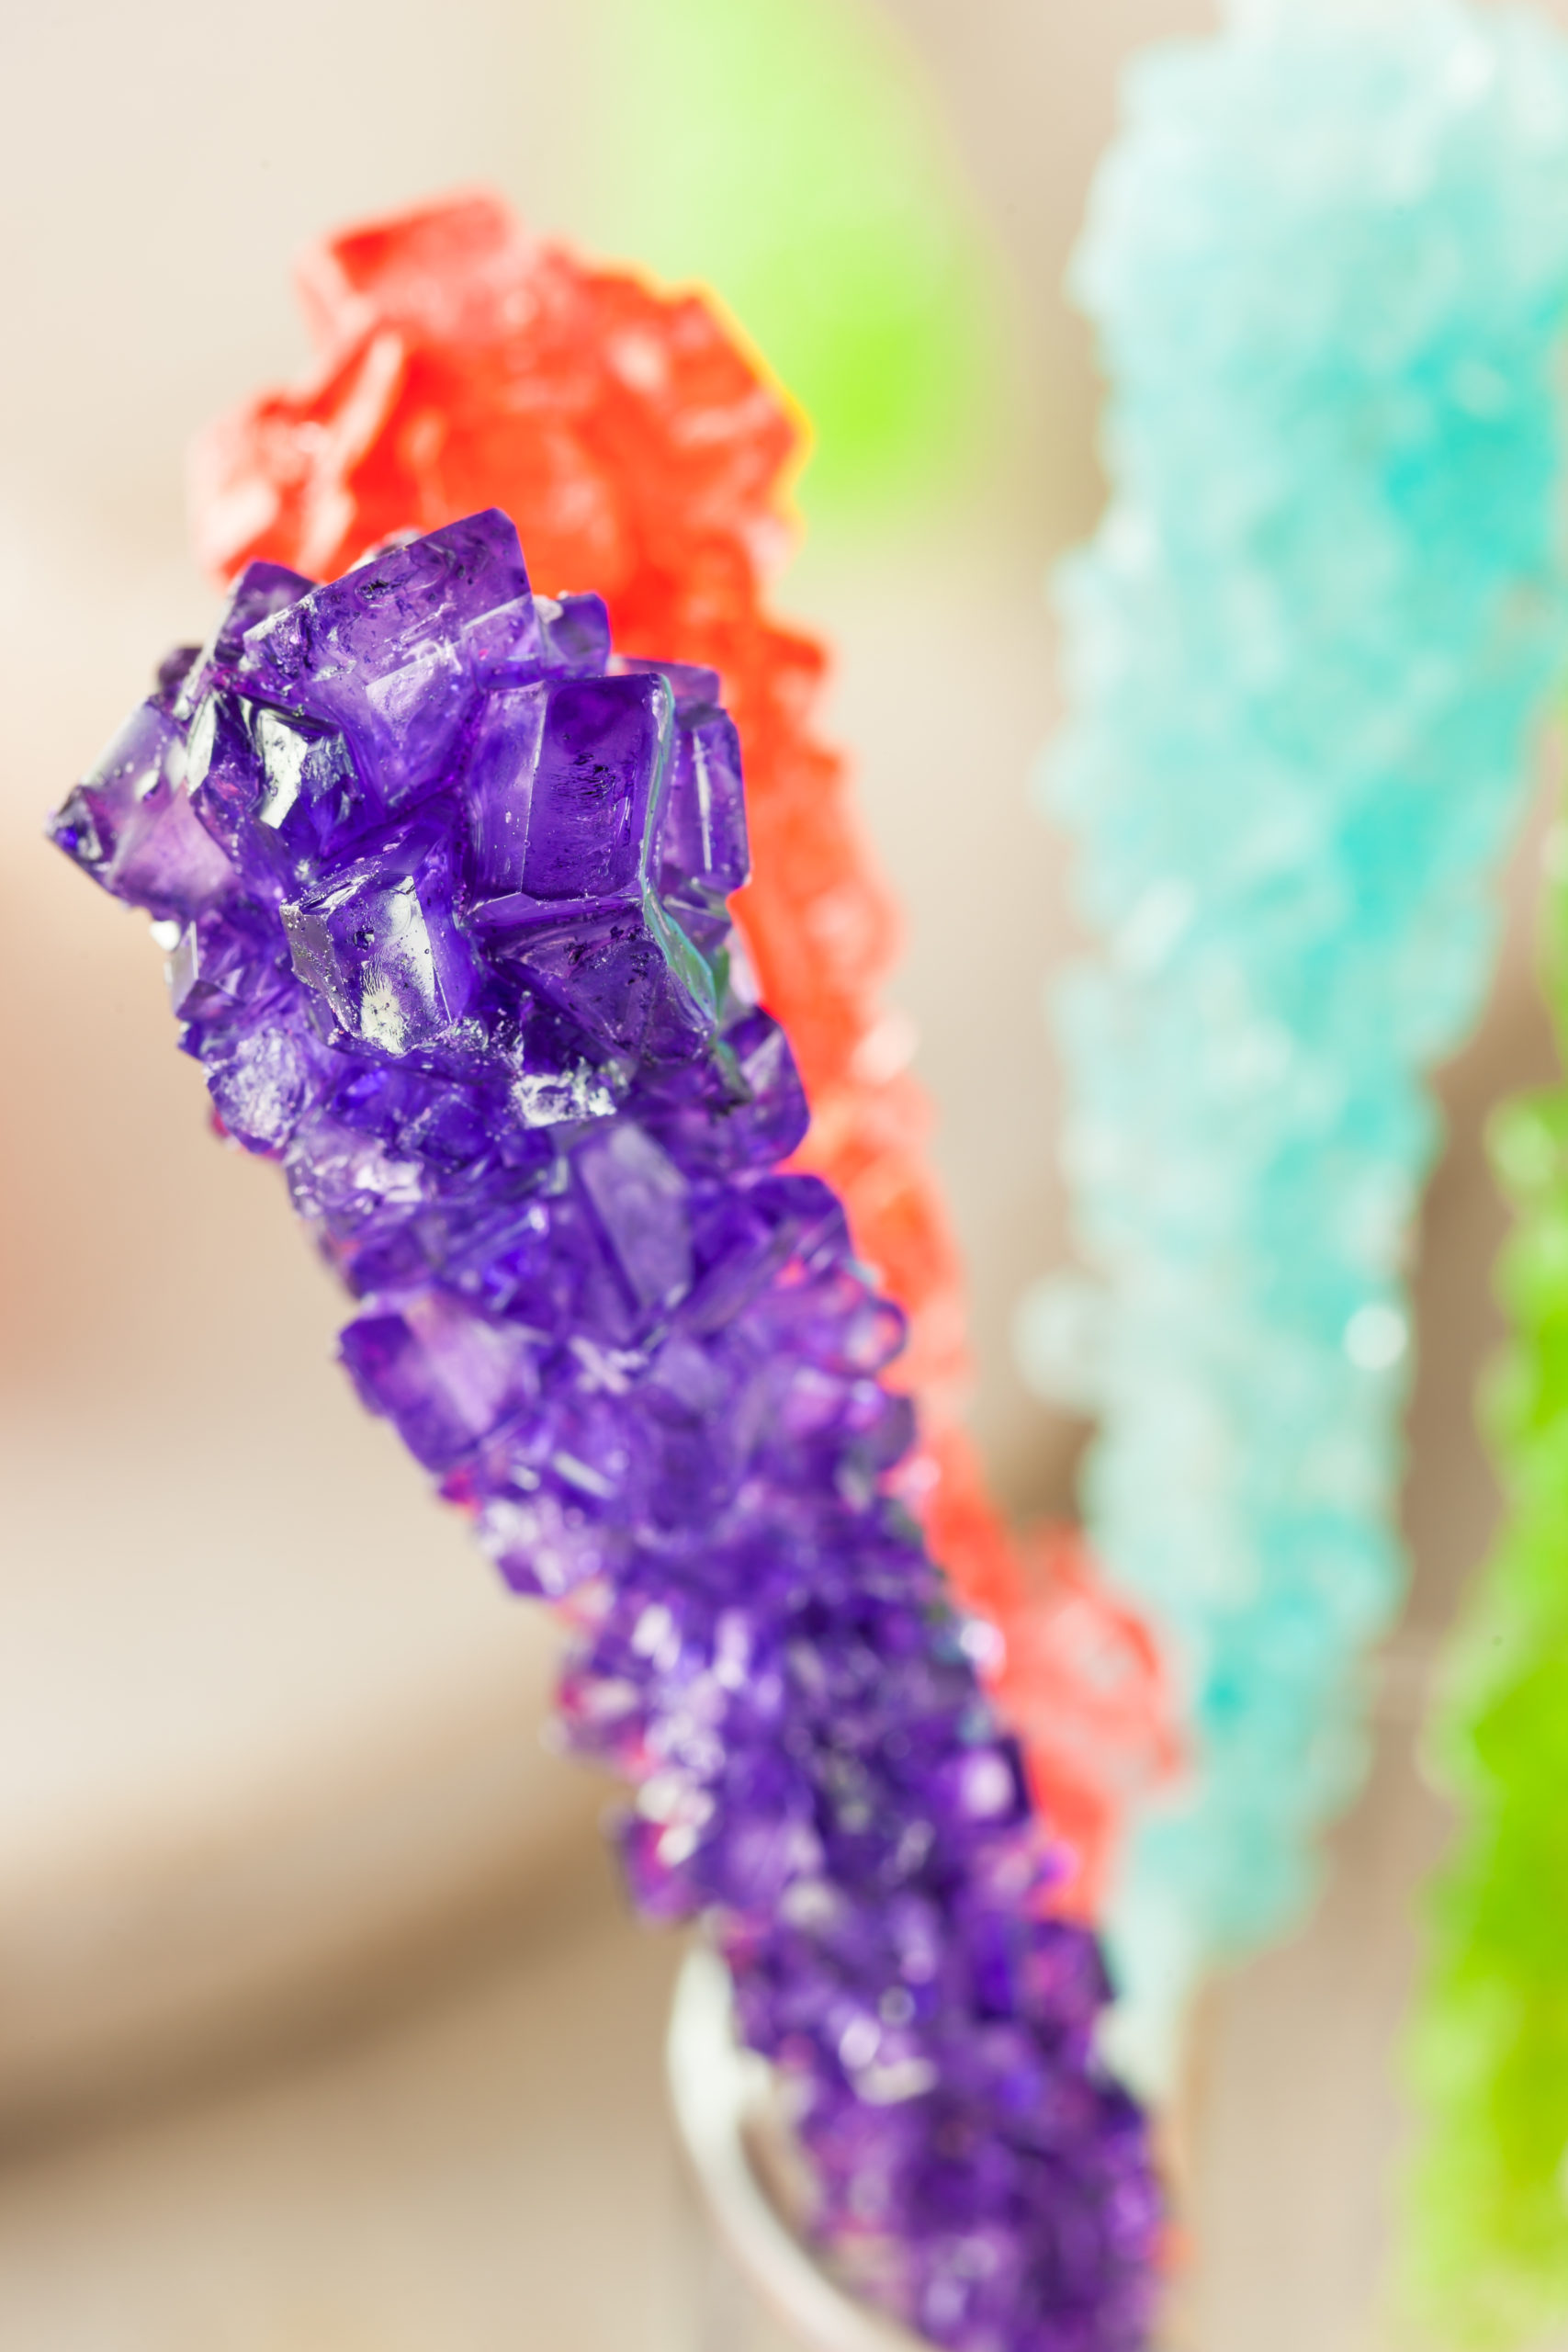 Sweet Sugary Multi Colored Rock Candy Ready to Eat